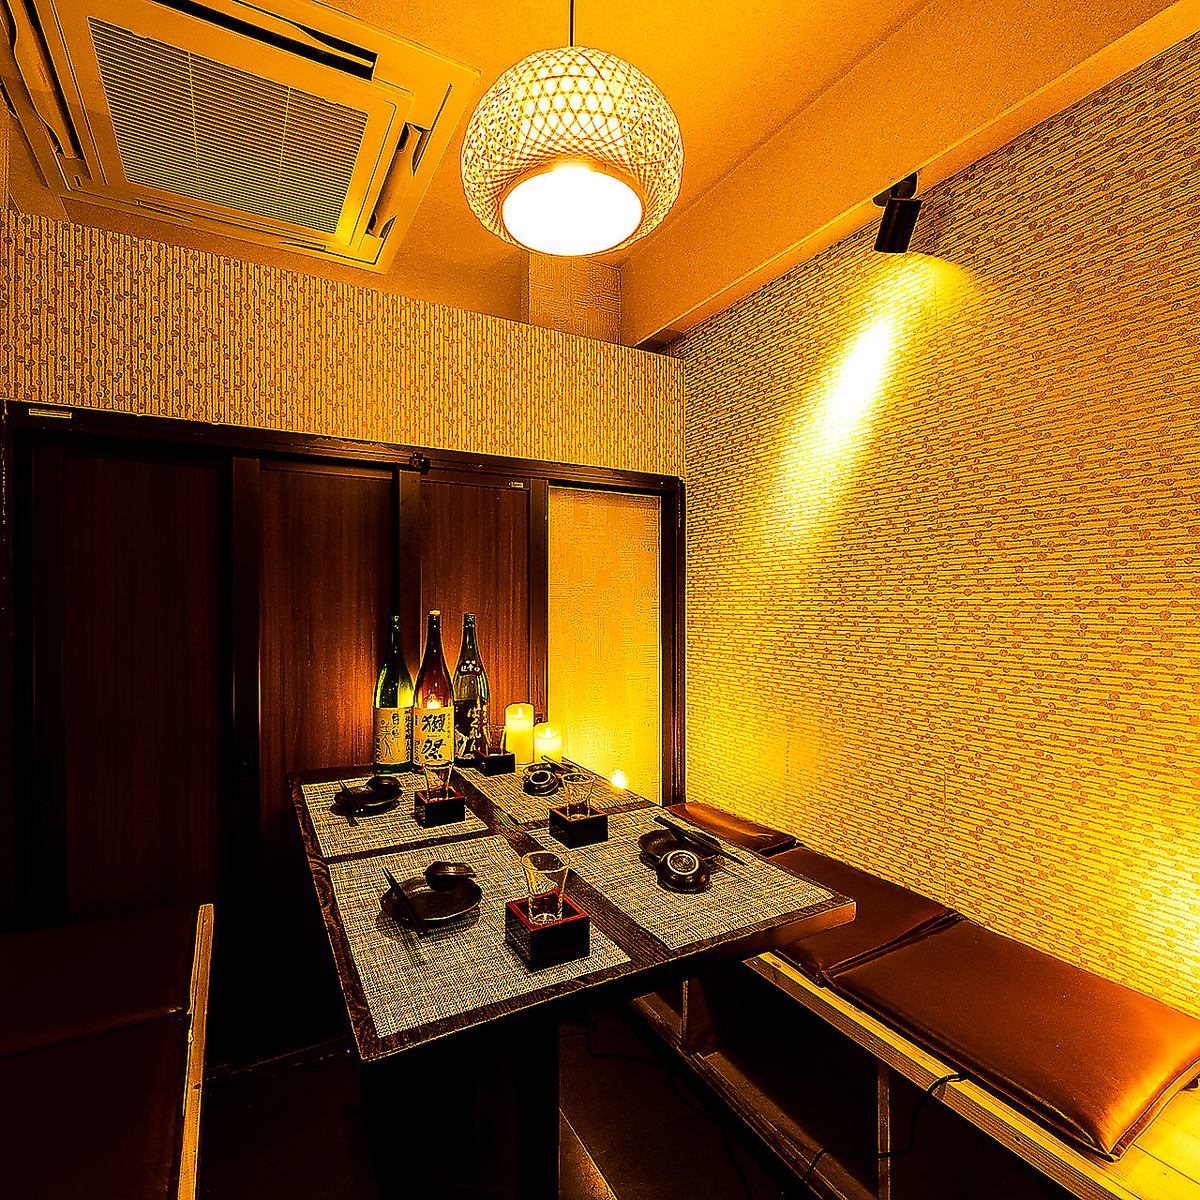 Completely private rooms are also available! Spend a relaxing time in a calm Japanese space.